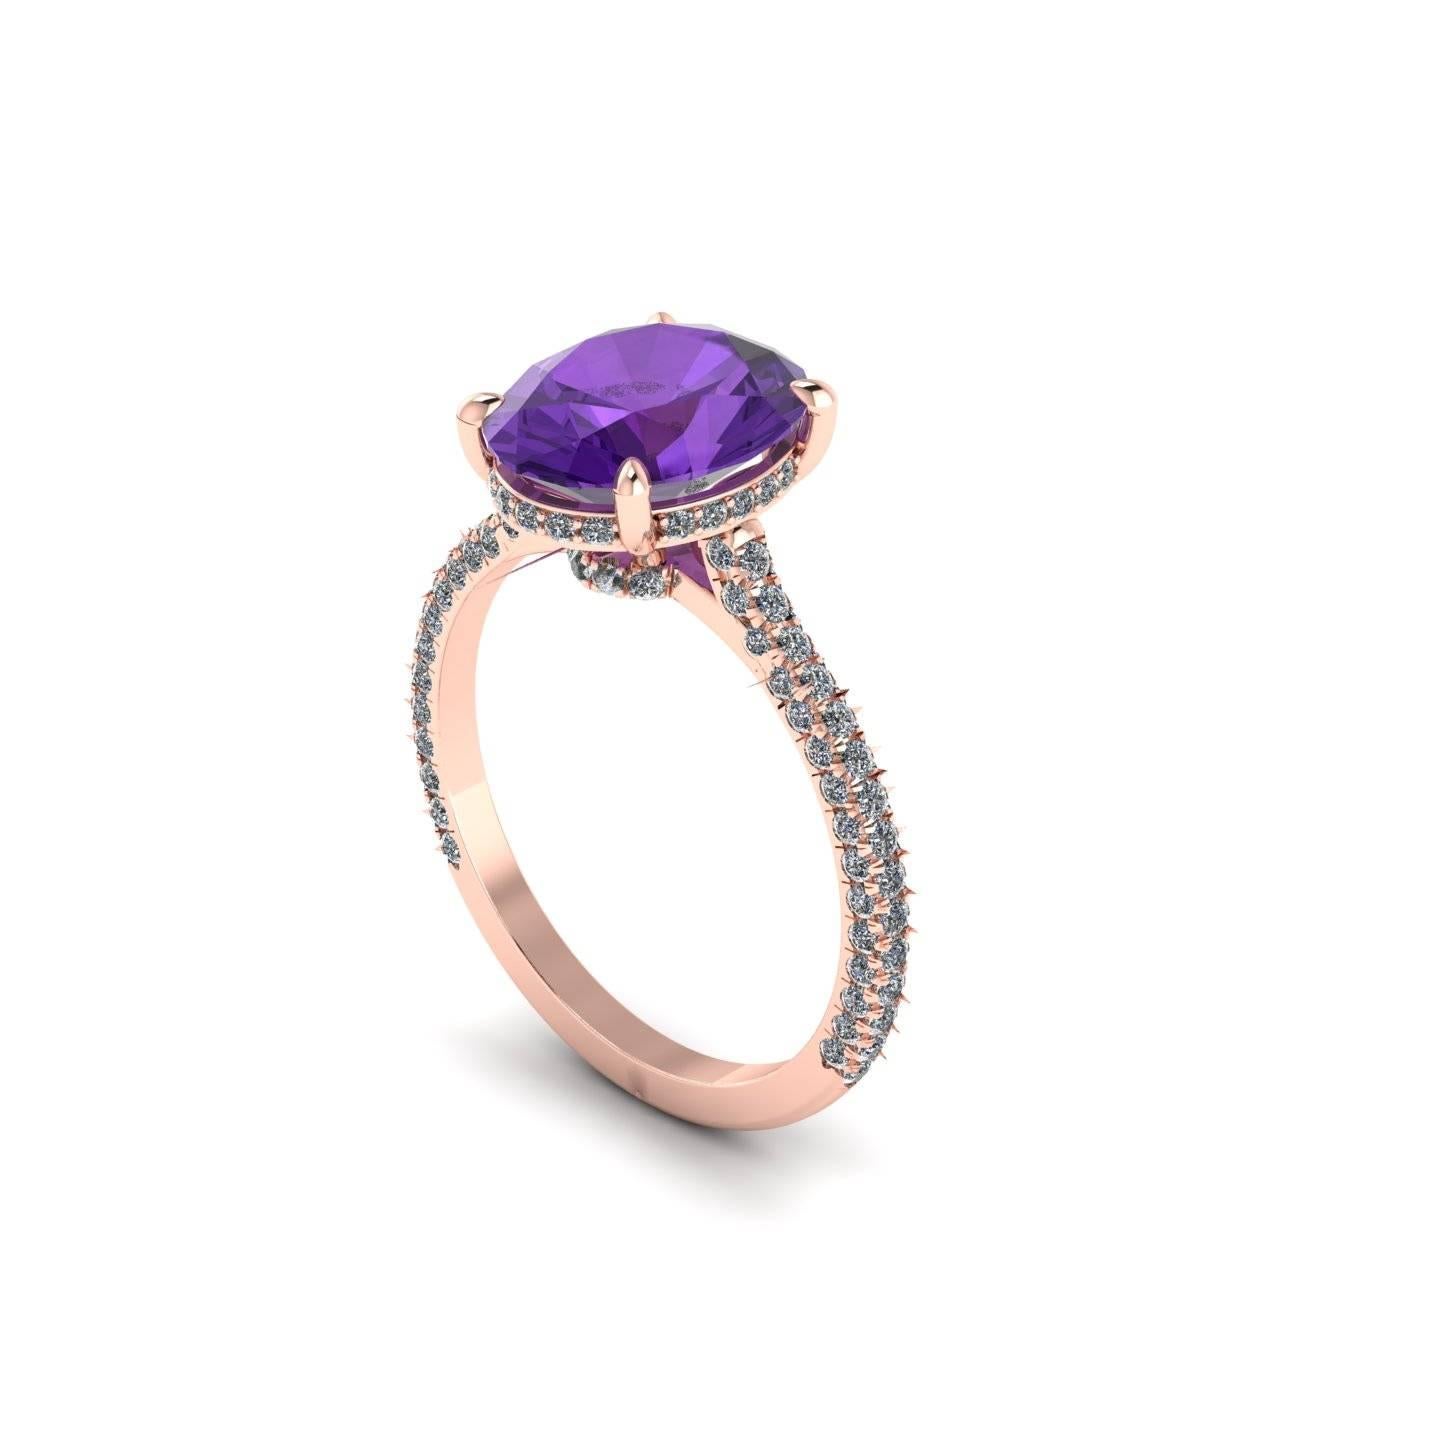 Natural Purple Oval Amethyst, hand cut in Oval cut shape, clean and pure gem, conveiced in an hand made 18k Rose gold cocktail ring,
adorned with a shower of ultra white diamonds, hand set, on almost every surface of the ring, to give the maximum